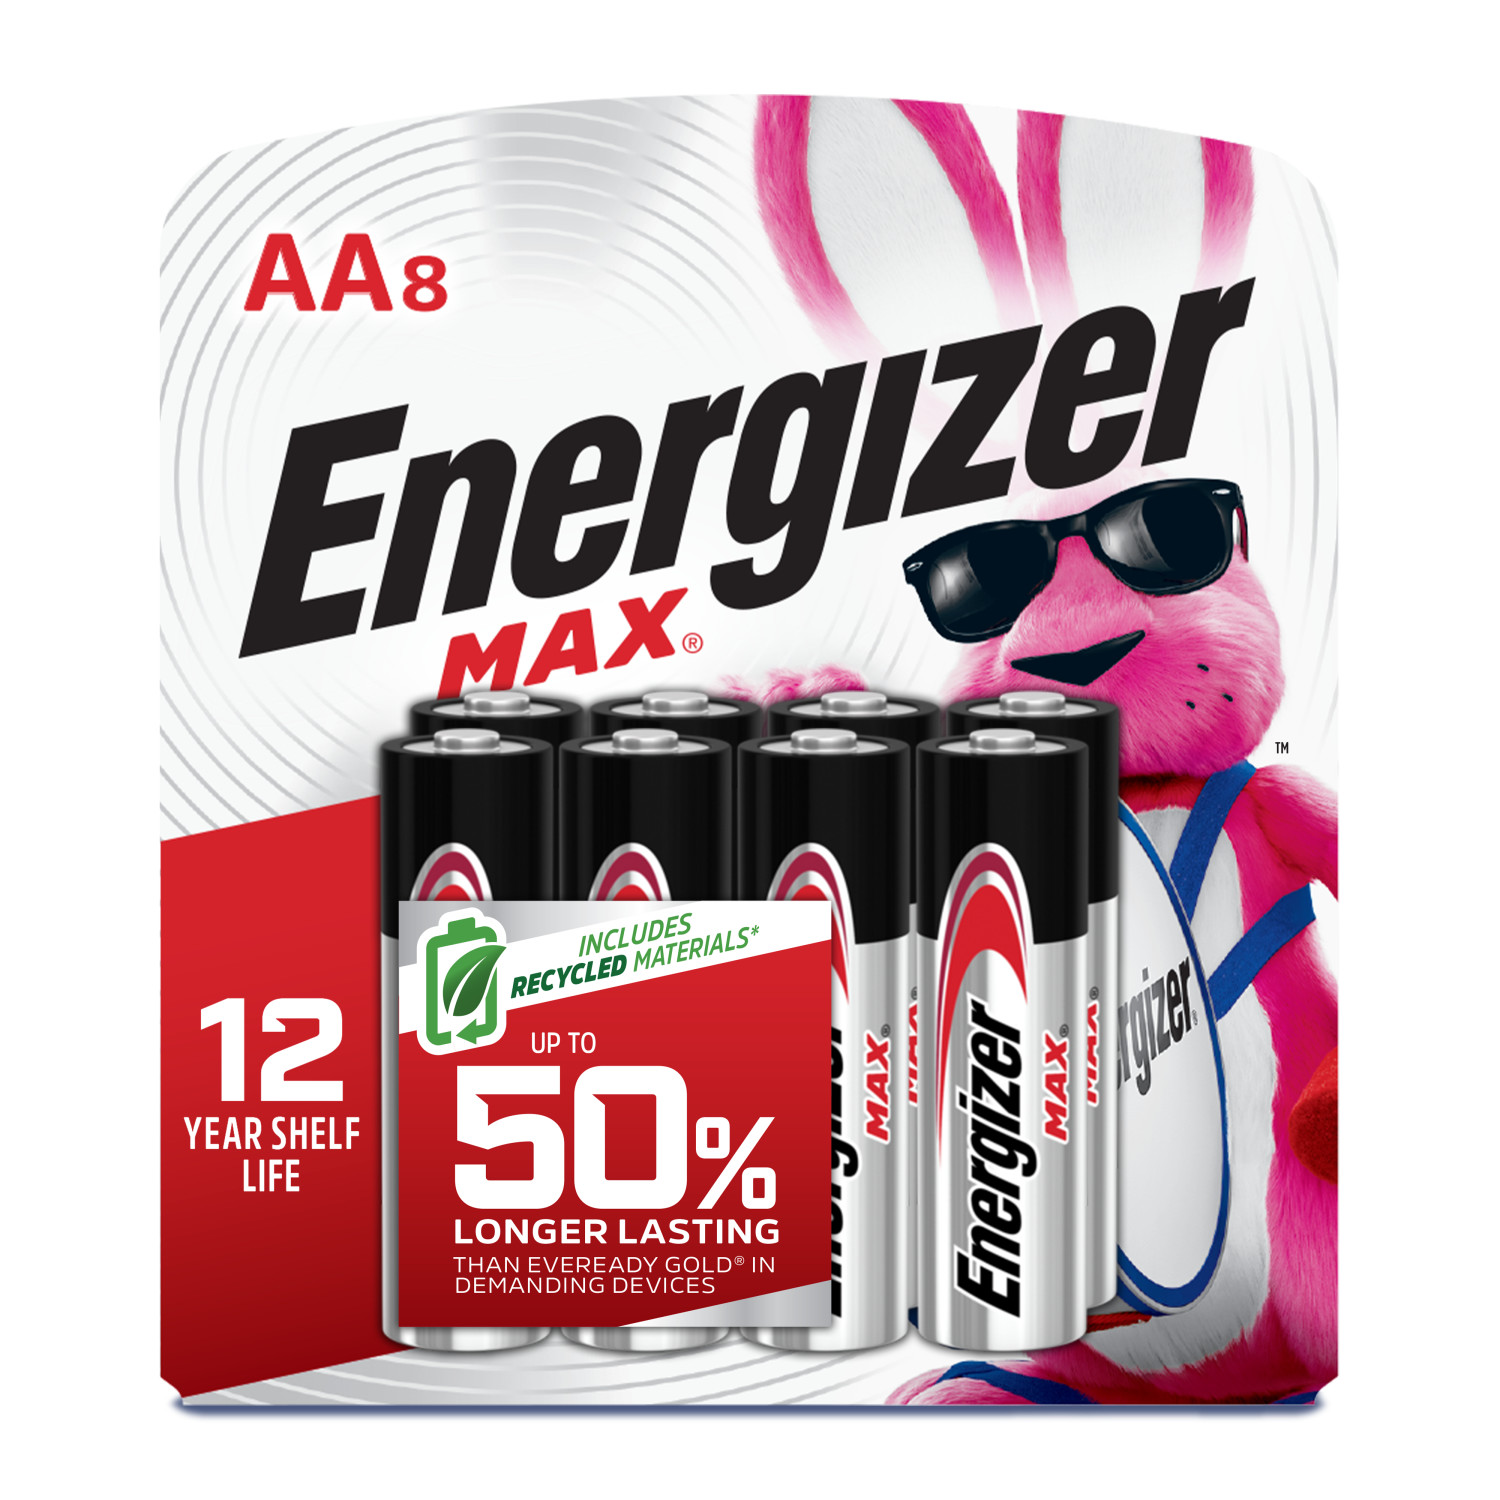 Energizer MAX AA Batteries (8 Pack), Double A Alkaline Batteries - image 1 of 8